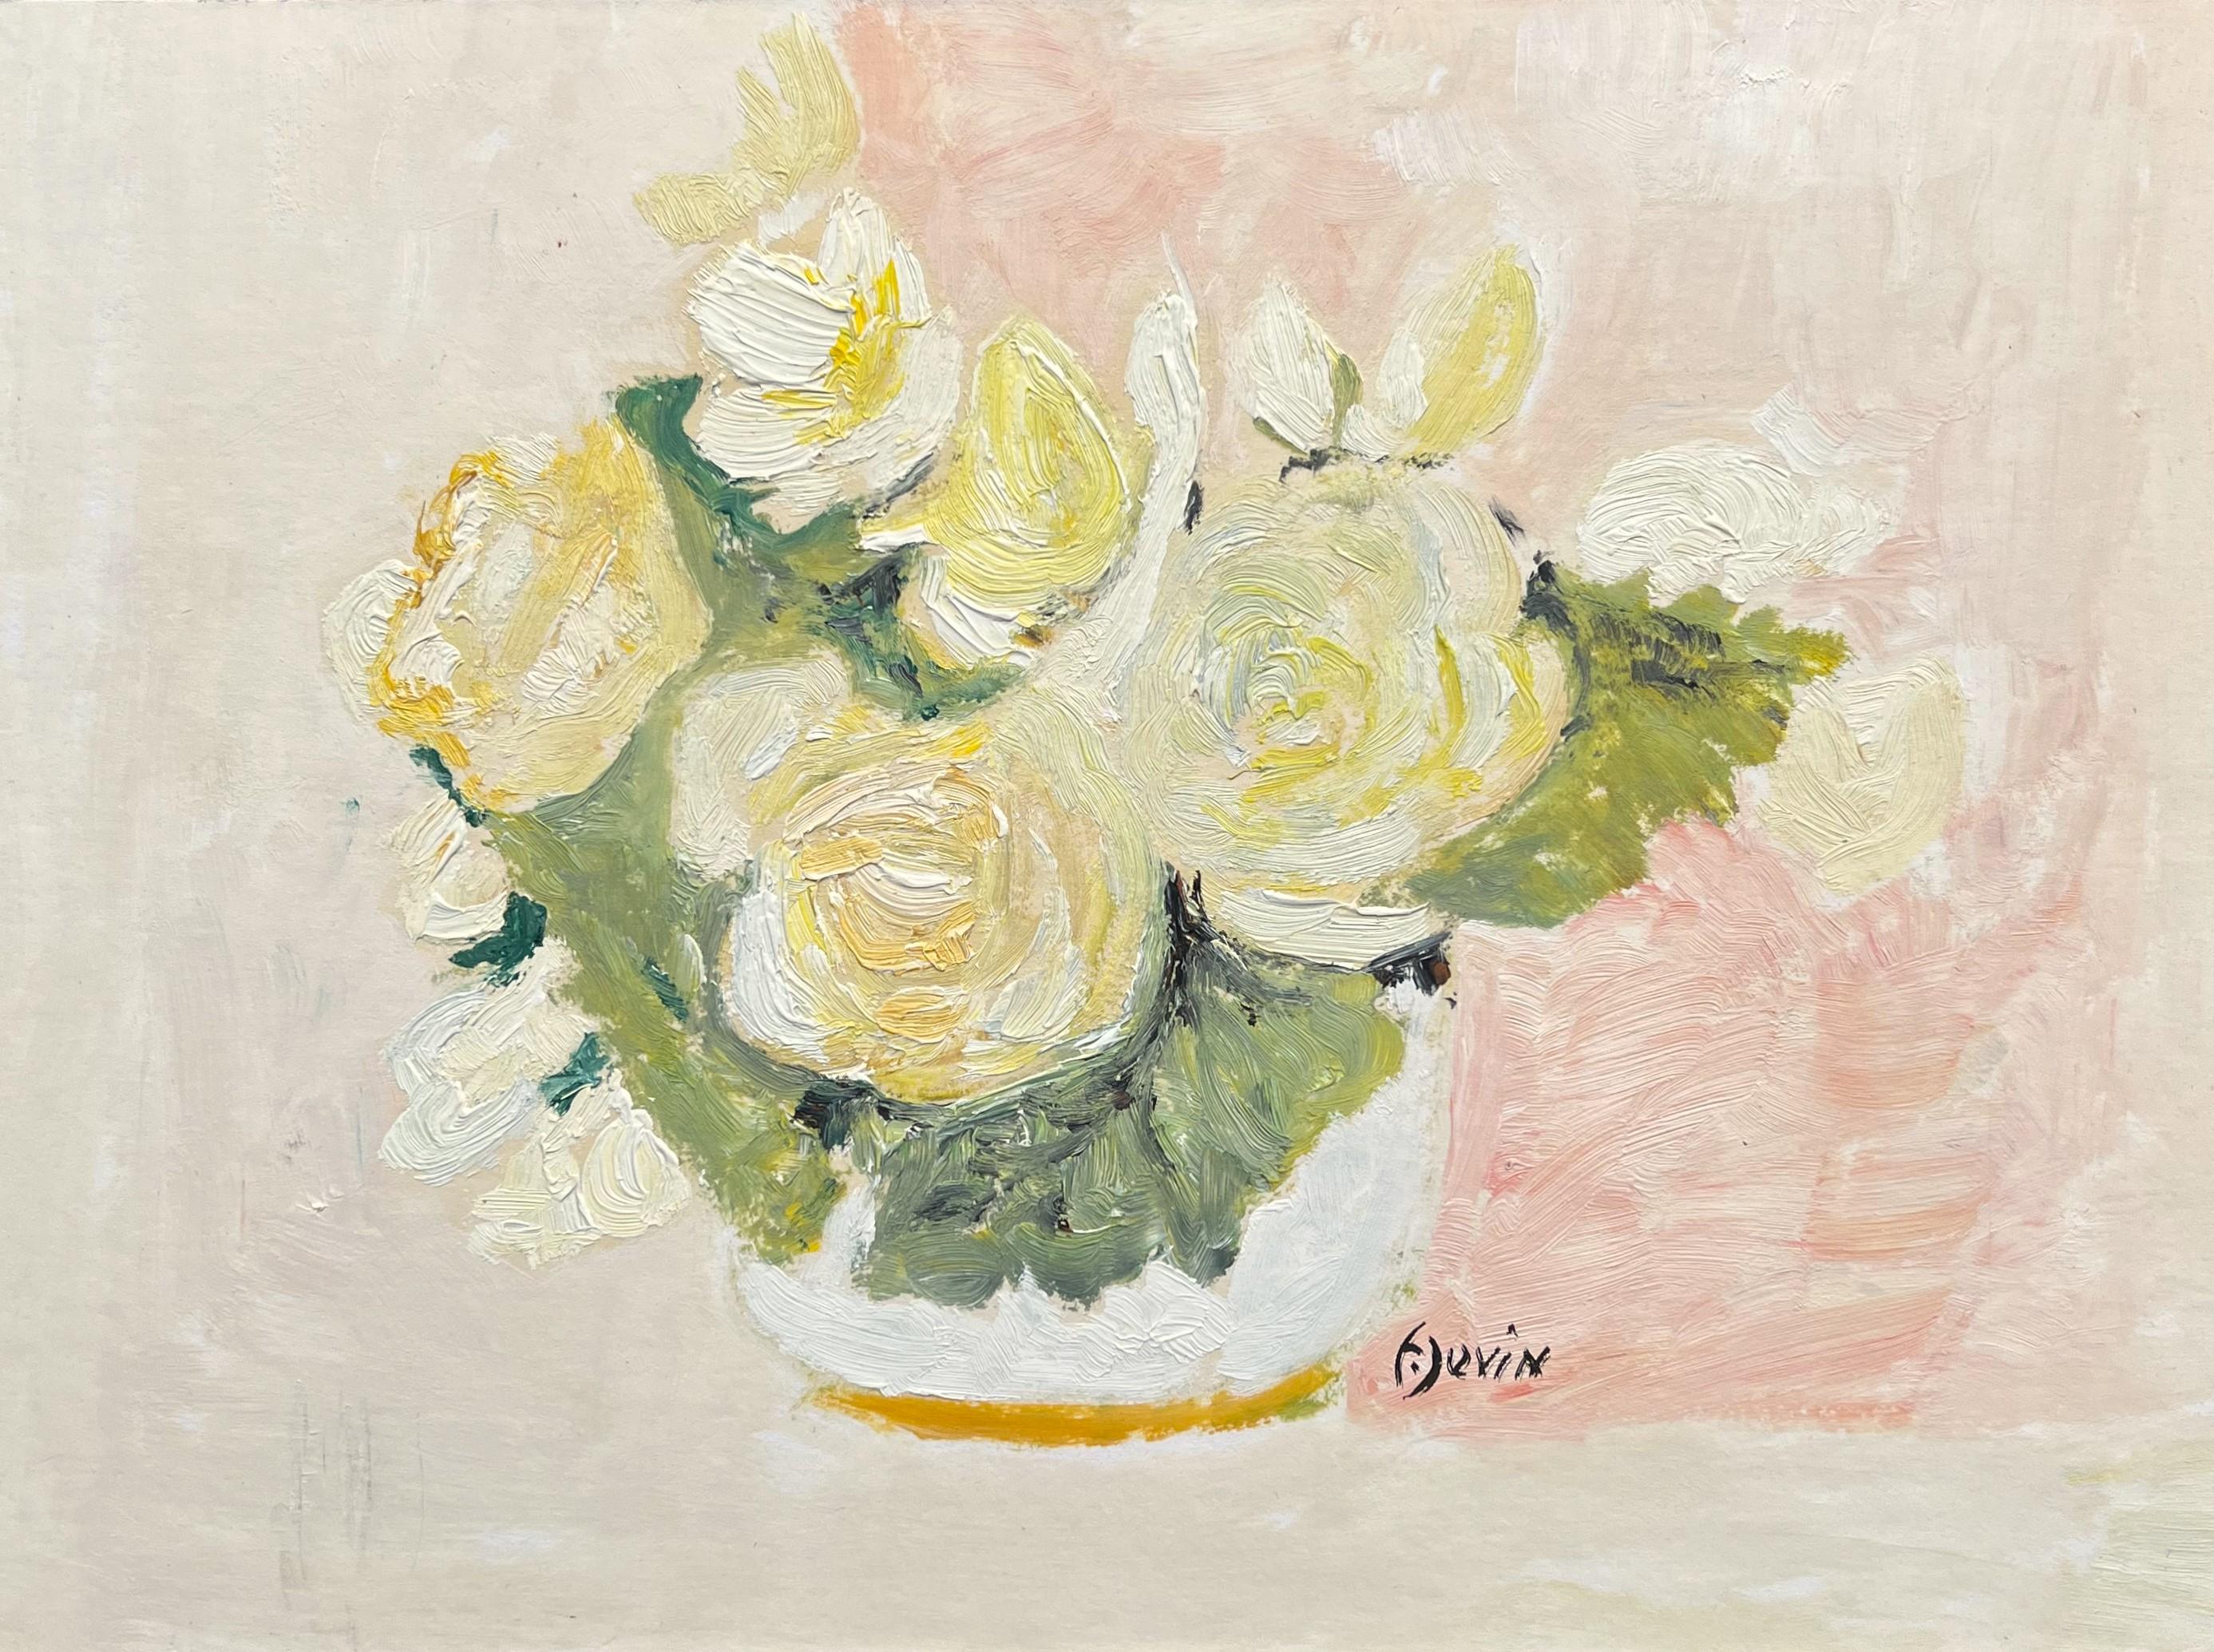 Françoise Juvin - Small bouquet of buttercups
Reference number FJ106
Framed with a black wood floated frame.
24,5 x 31,5 cm frame included (19 x 26 cm without frame)
This work is painted with oil on a paper that is mounted on a board and placed in a